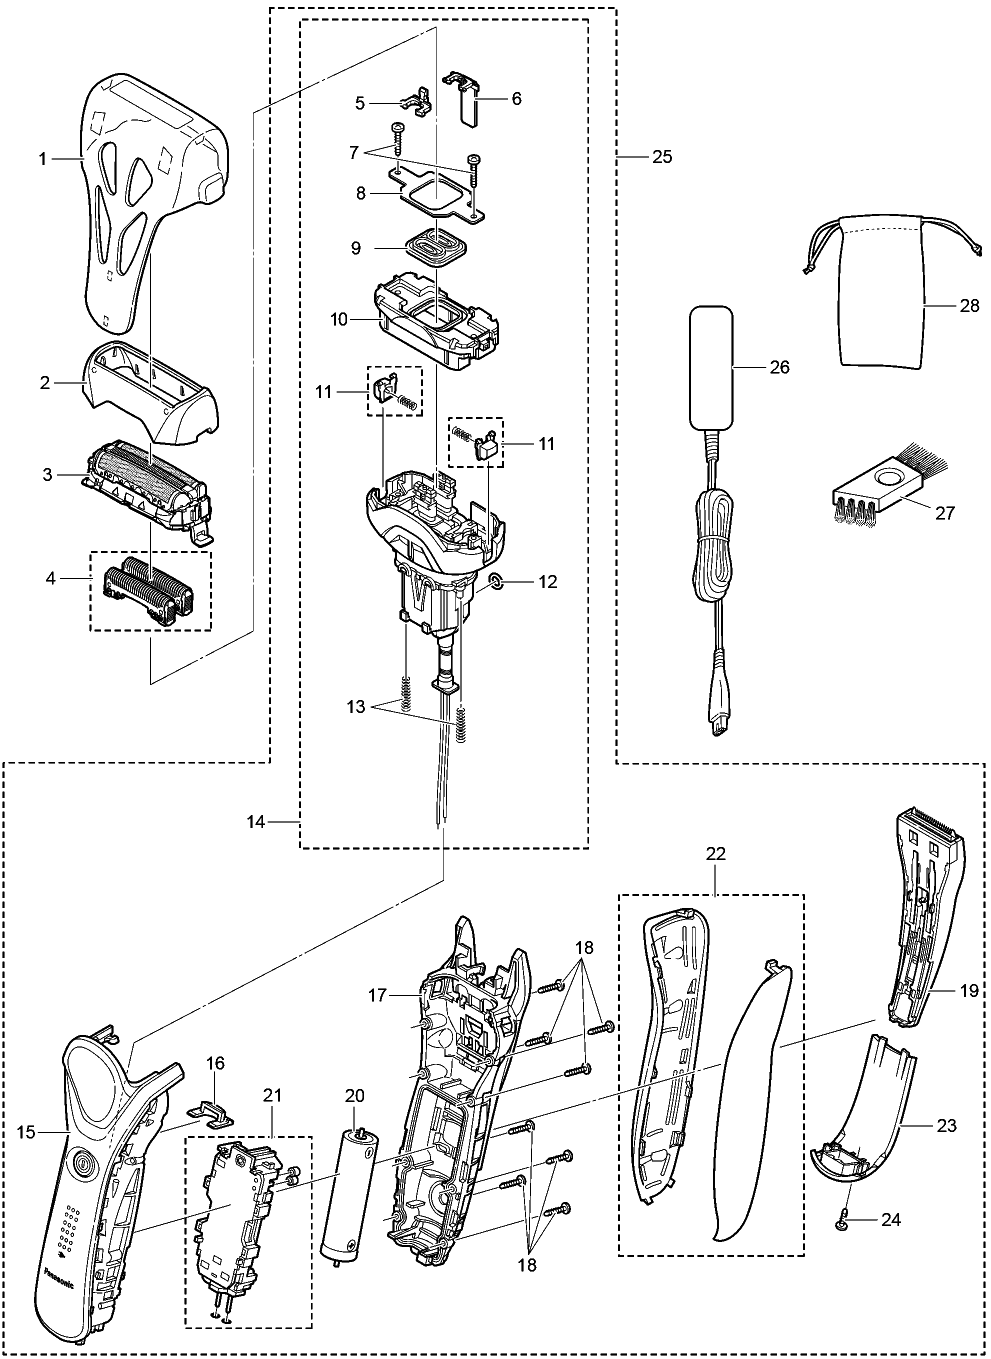 ES-RT67: Exploded View